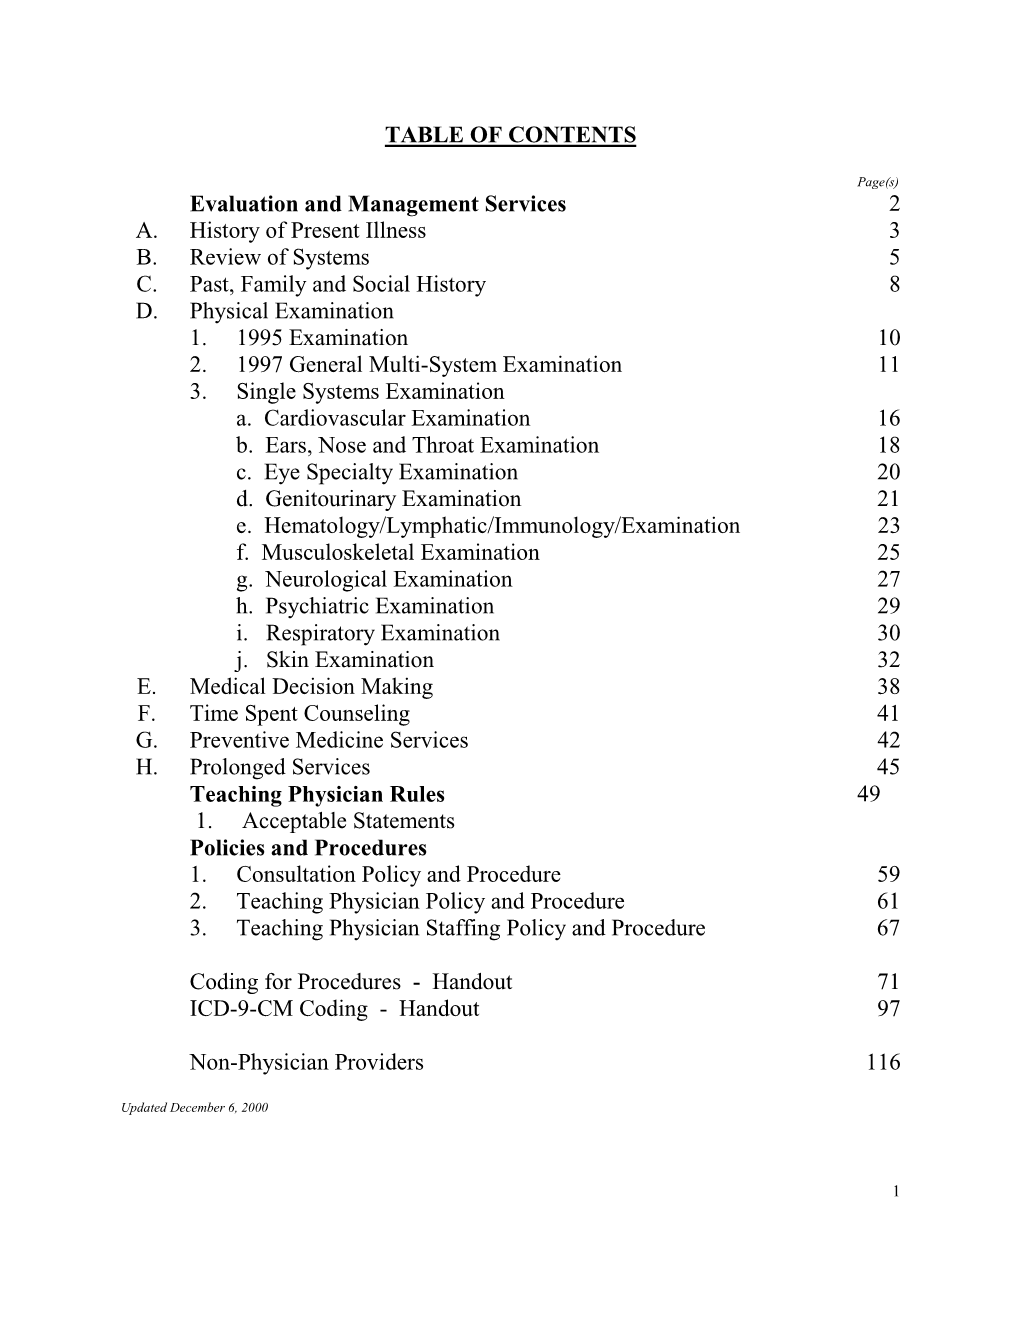 TABLE of CONTENTS Evaluation and Management Services 2 A